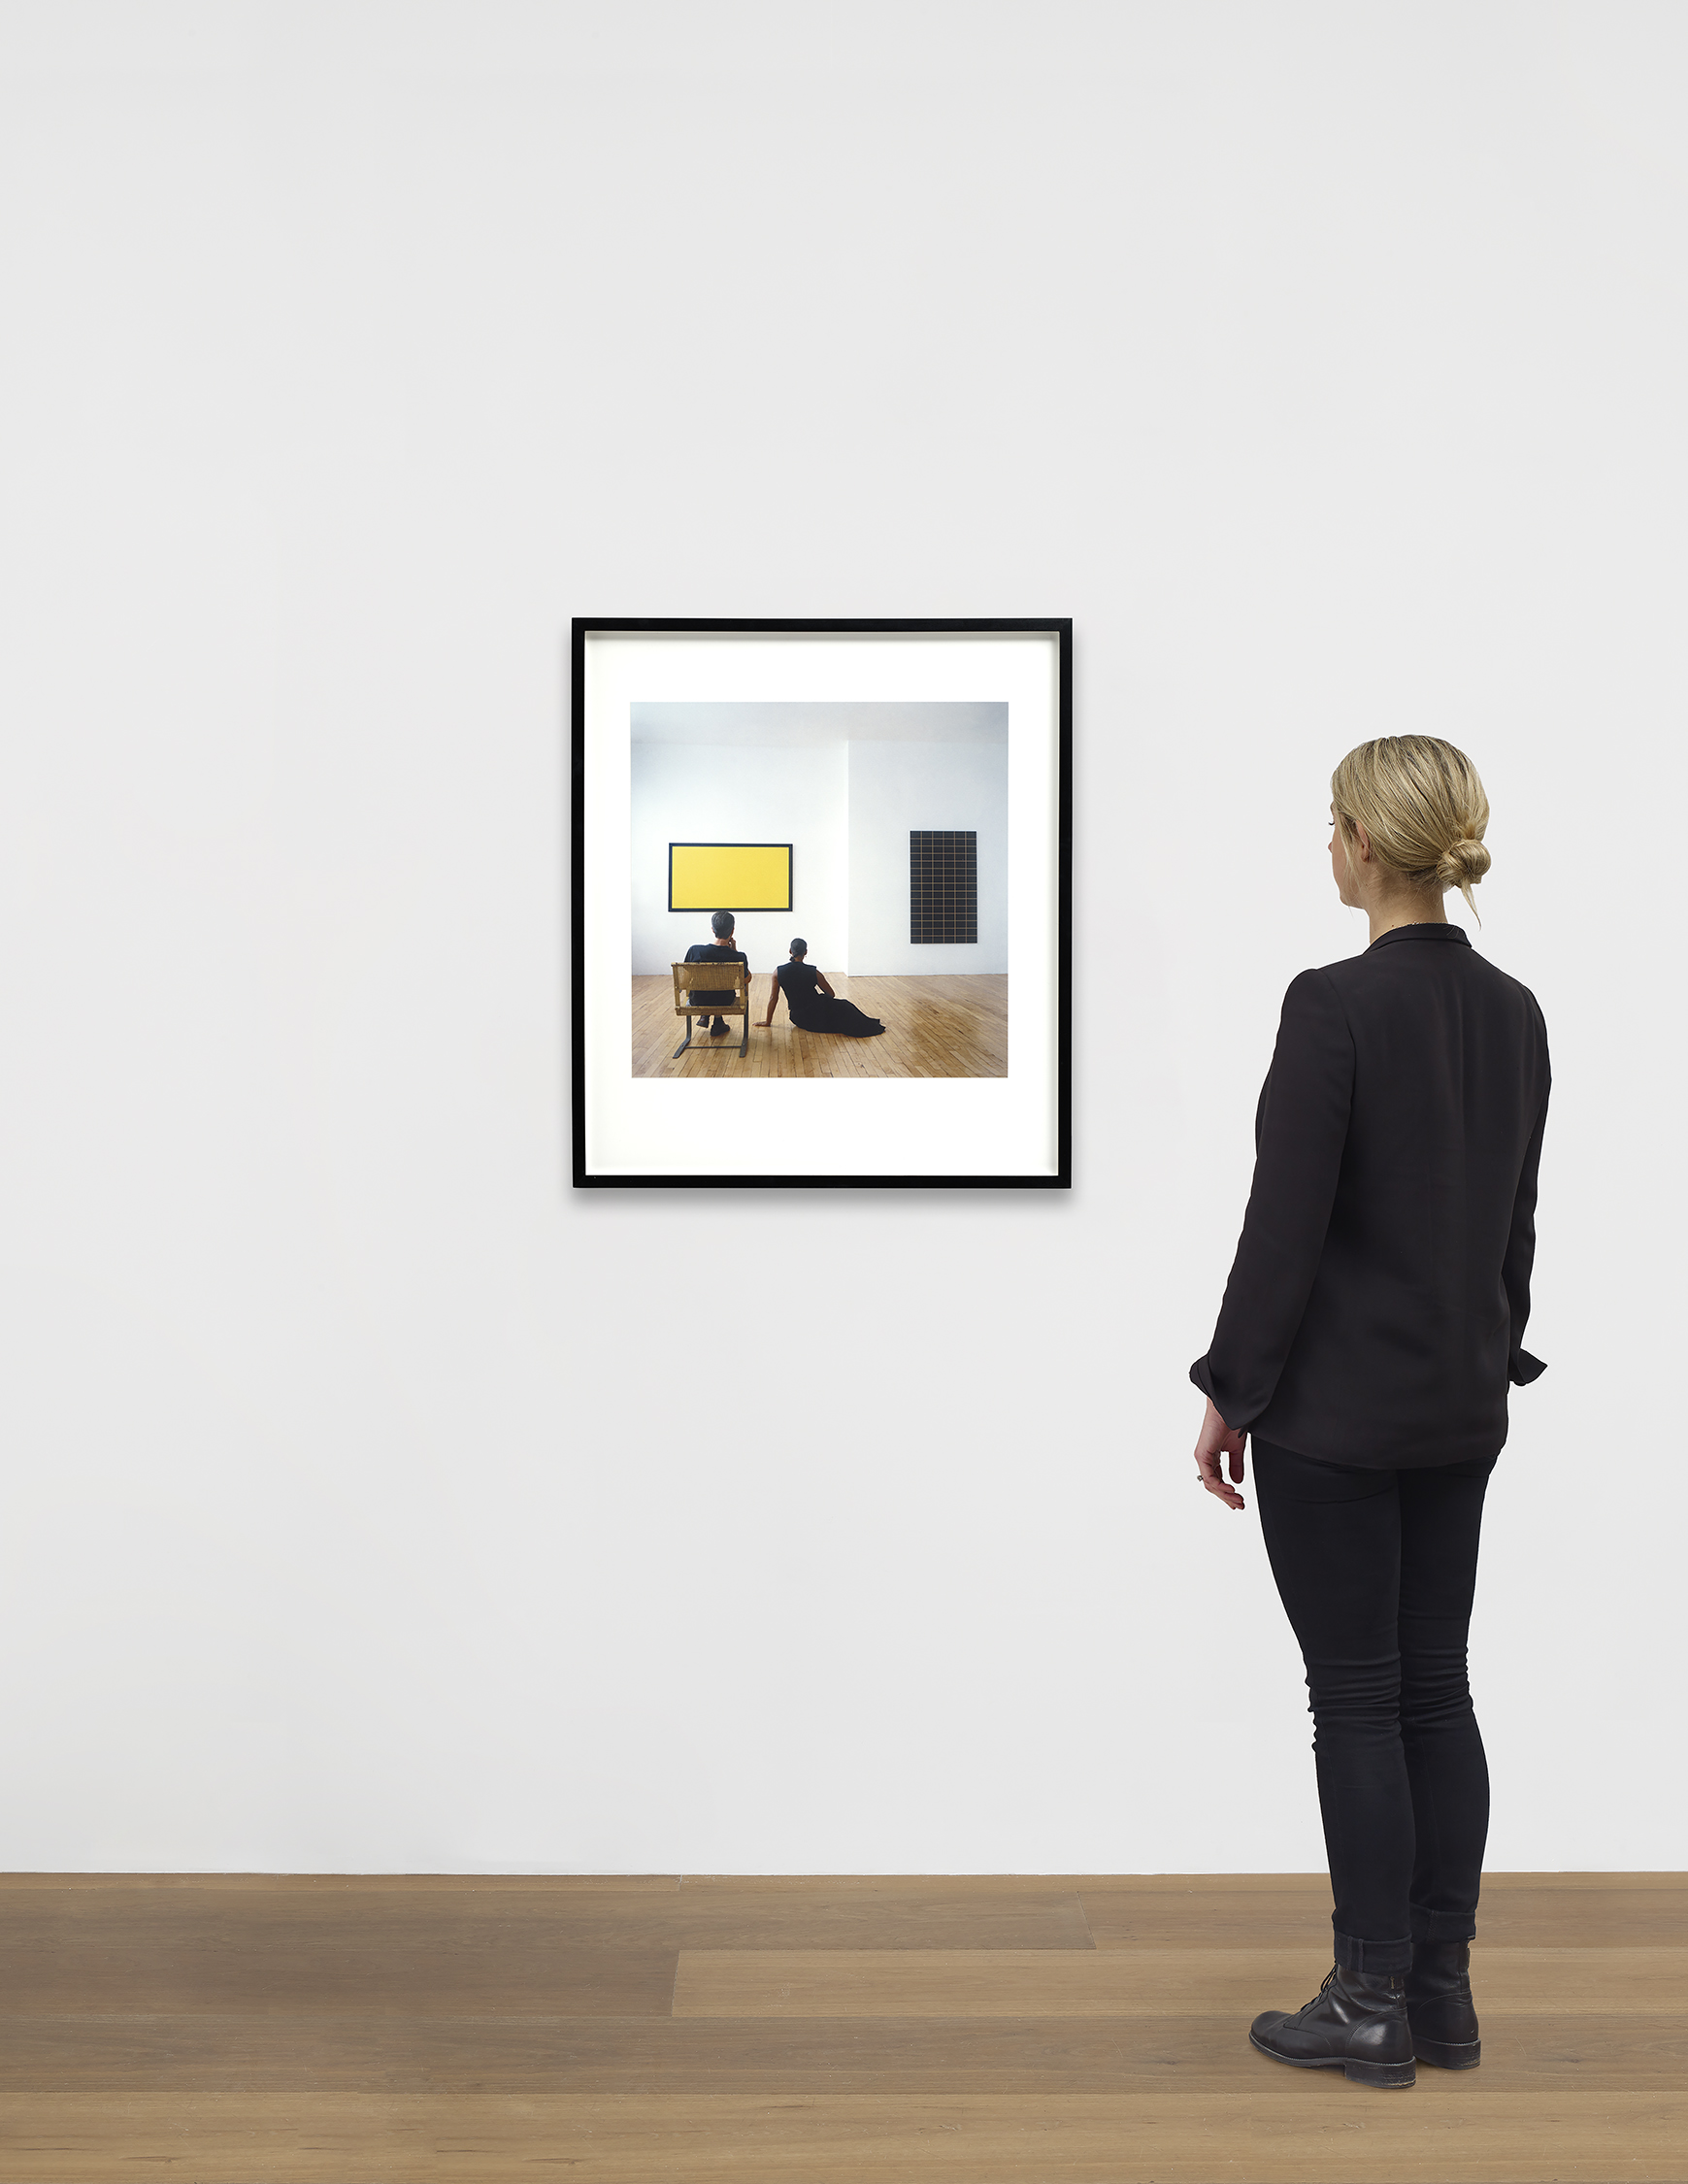 Image of Carrie Mae Weems' work Untitled Yellow Painting, 2003